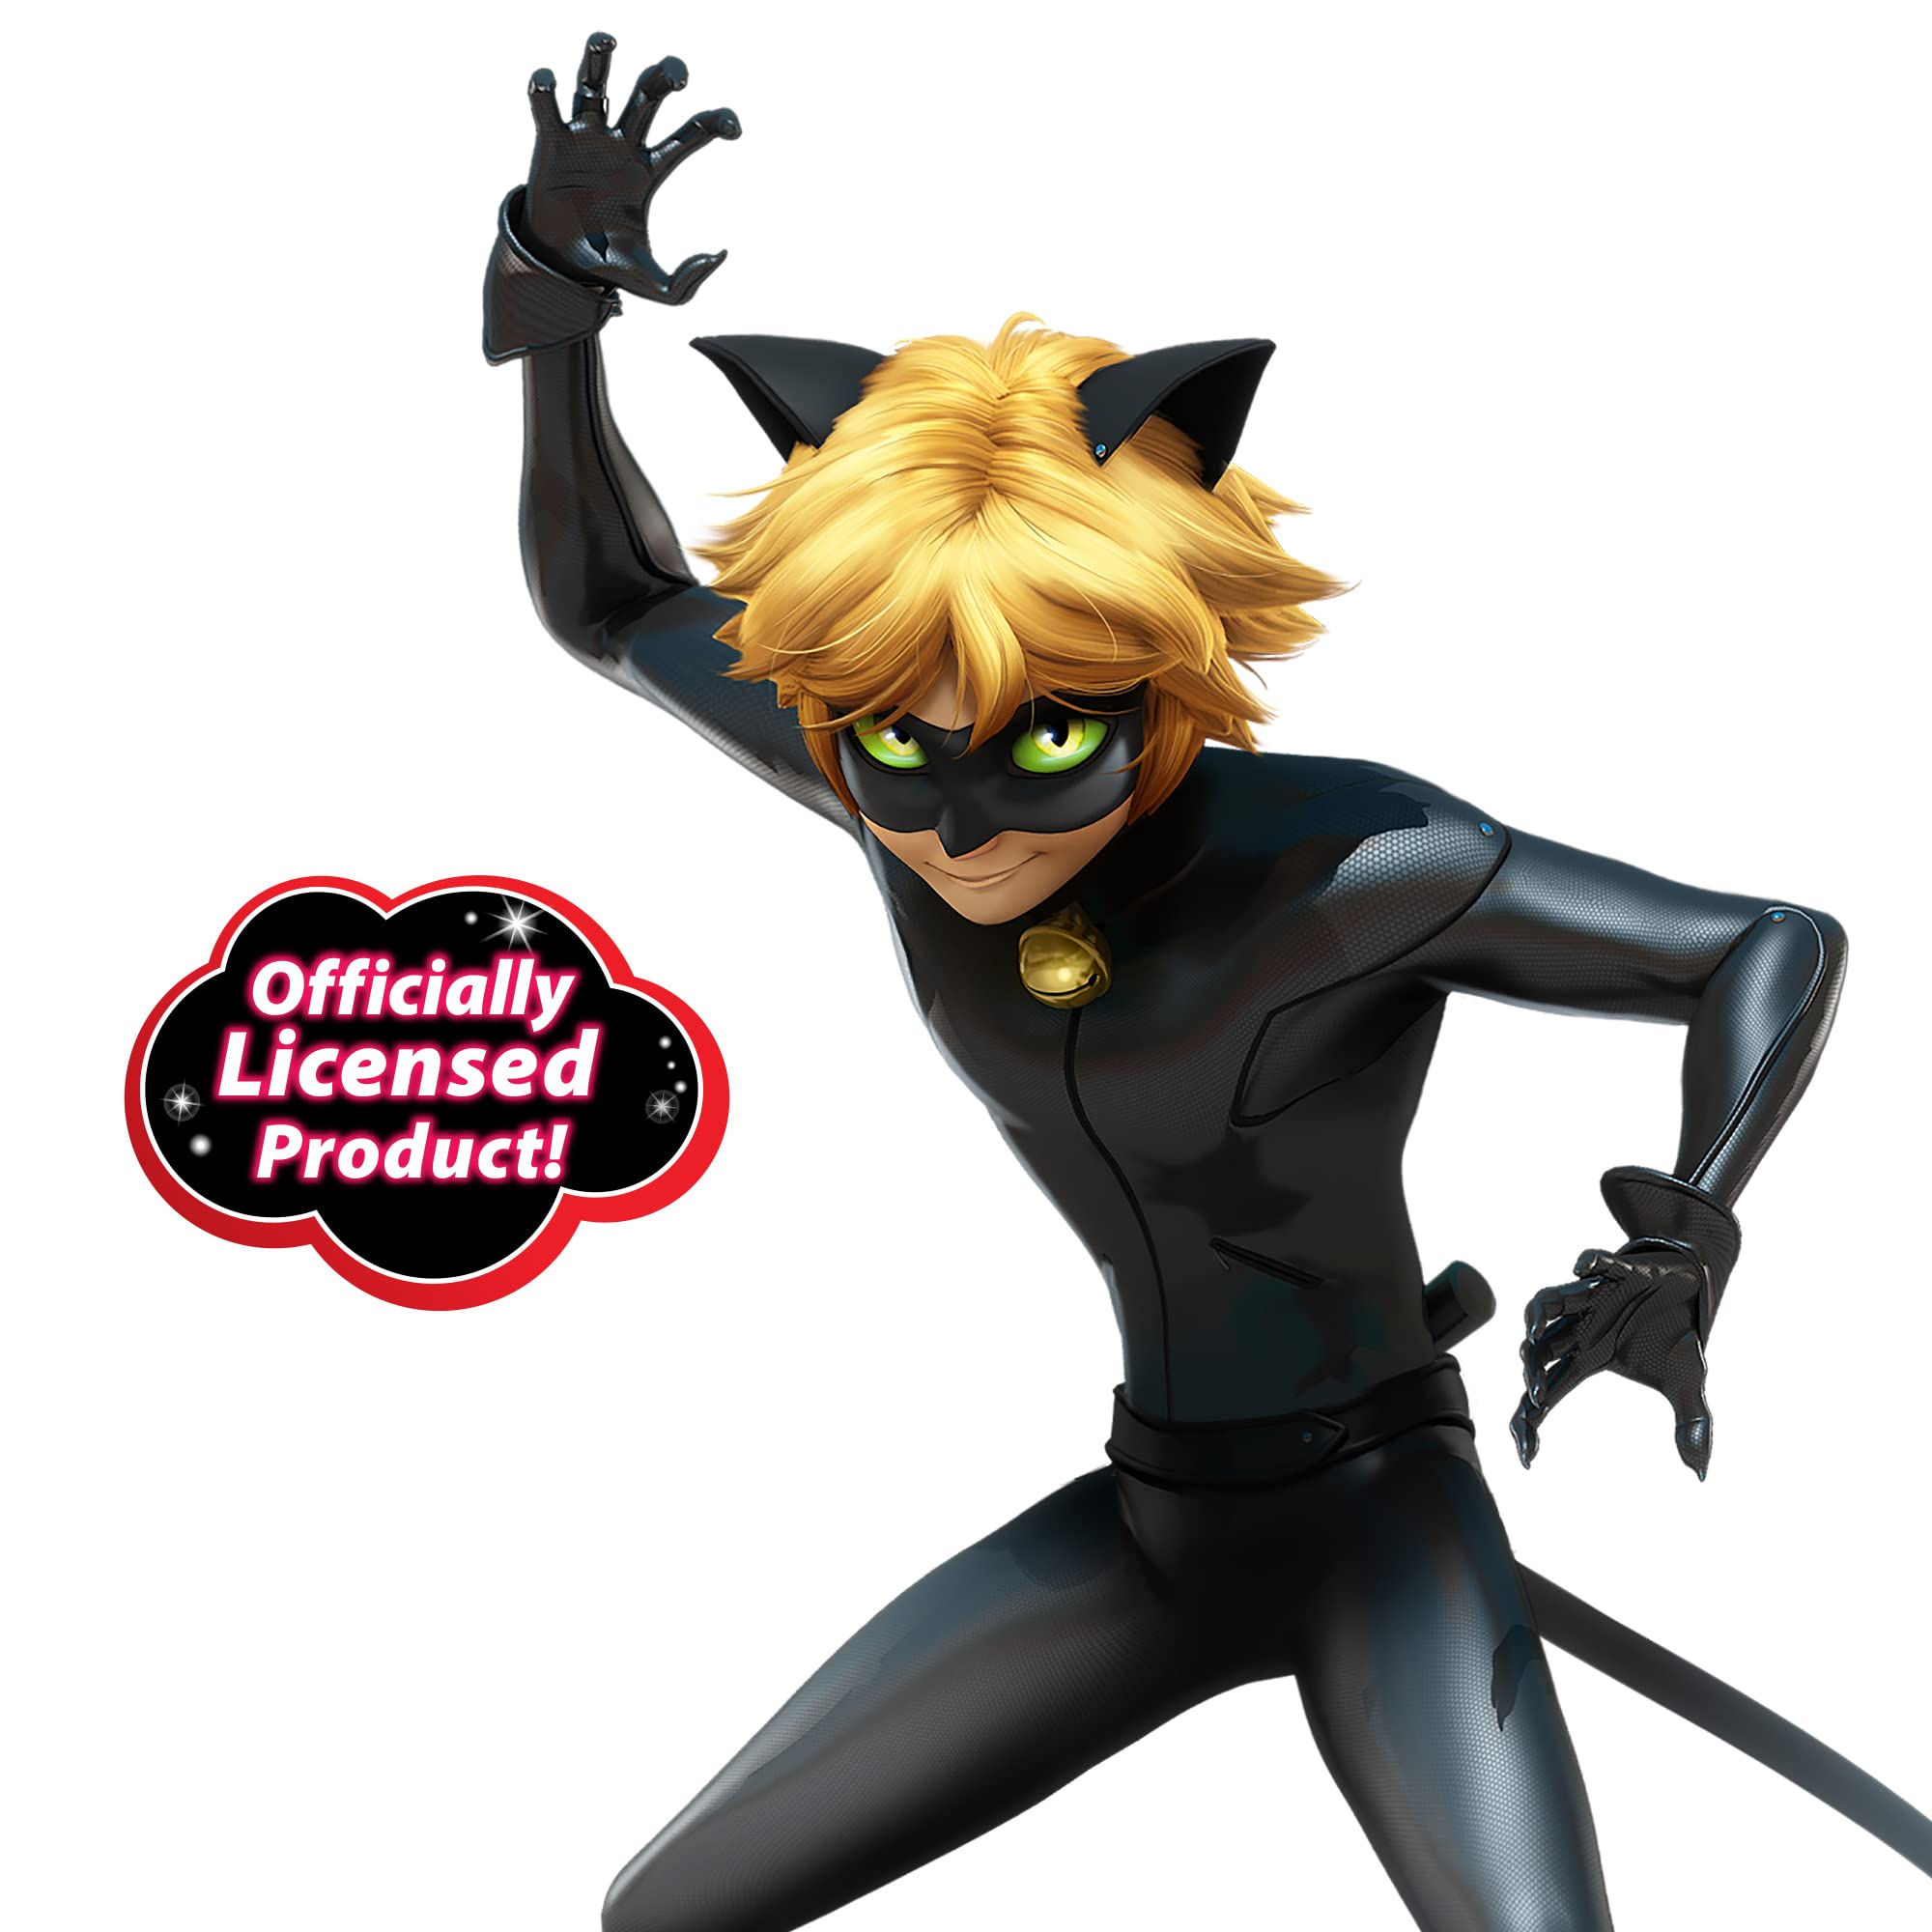 Miraculous: Tales Of Ladybug And Cat Noir Cat Noir Role Play Set Cat Noir Costume Kids Fancy Dress Set Mask And Accessories Ladybug Superhero Costumes For Girls And Boys